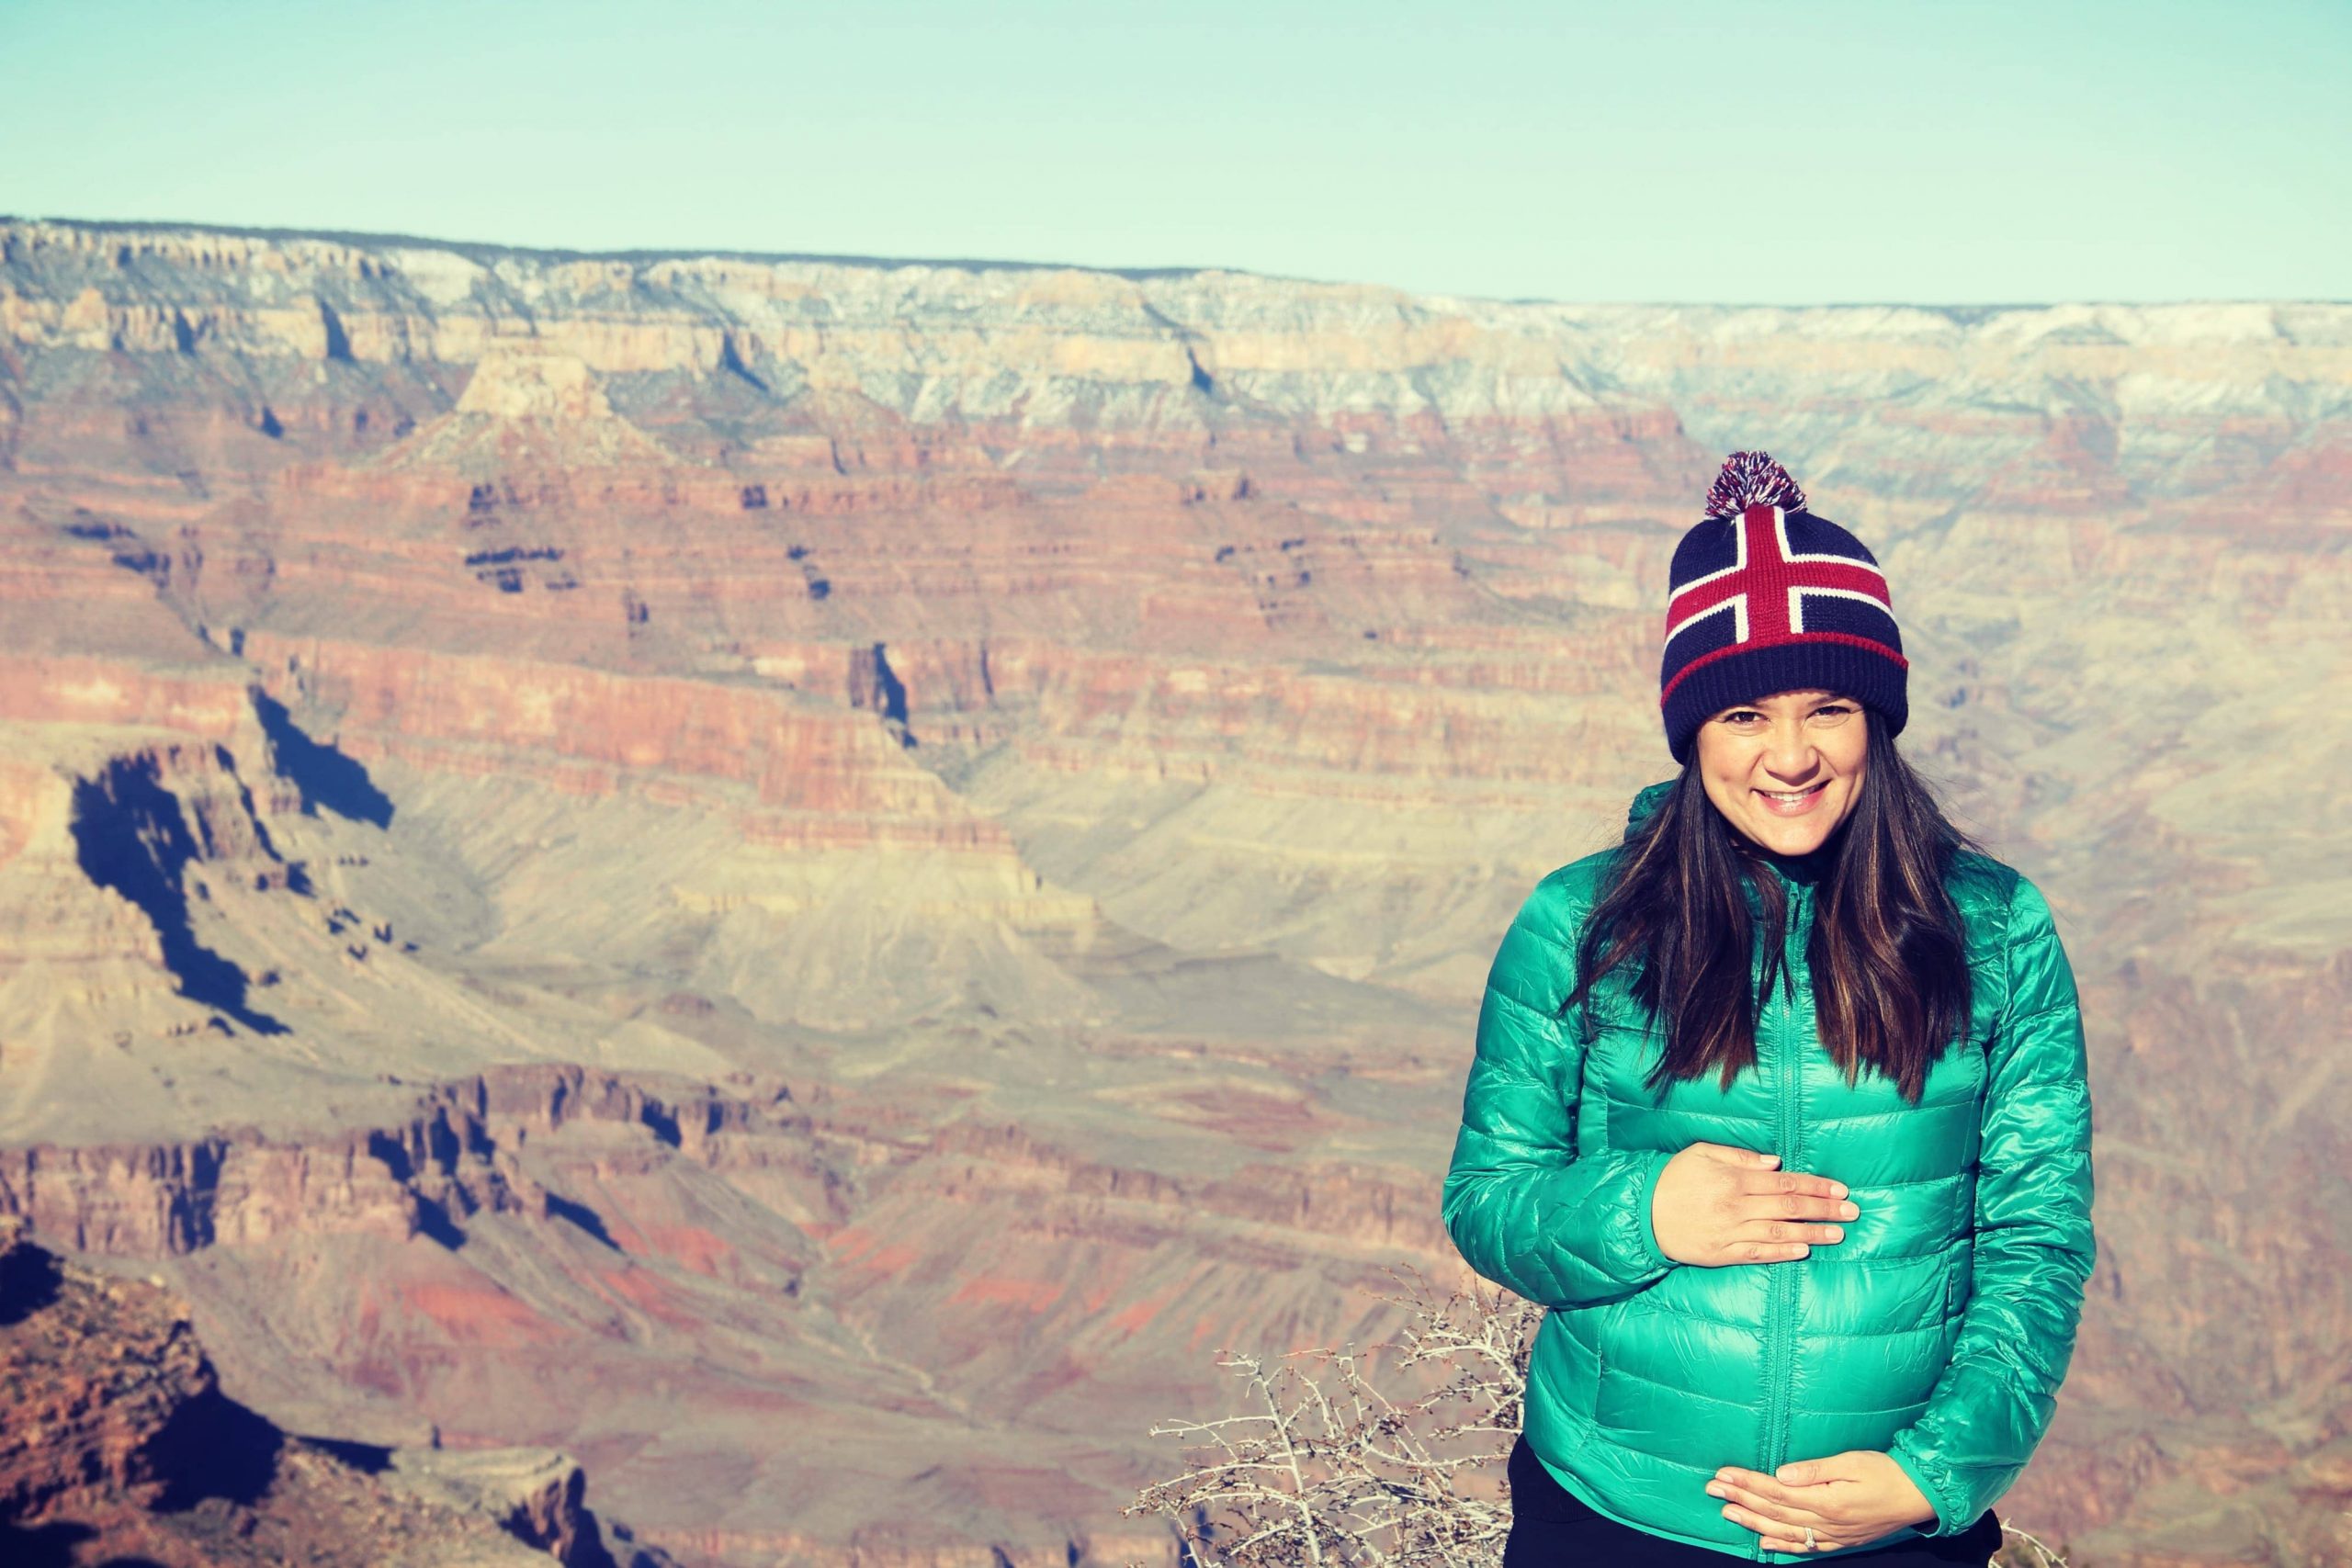 Our five month bump at the Grand Canyon